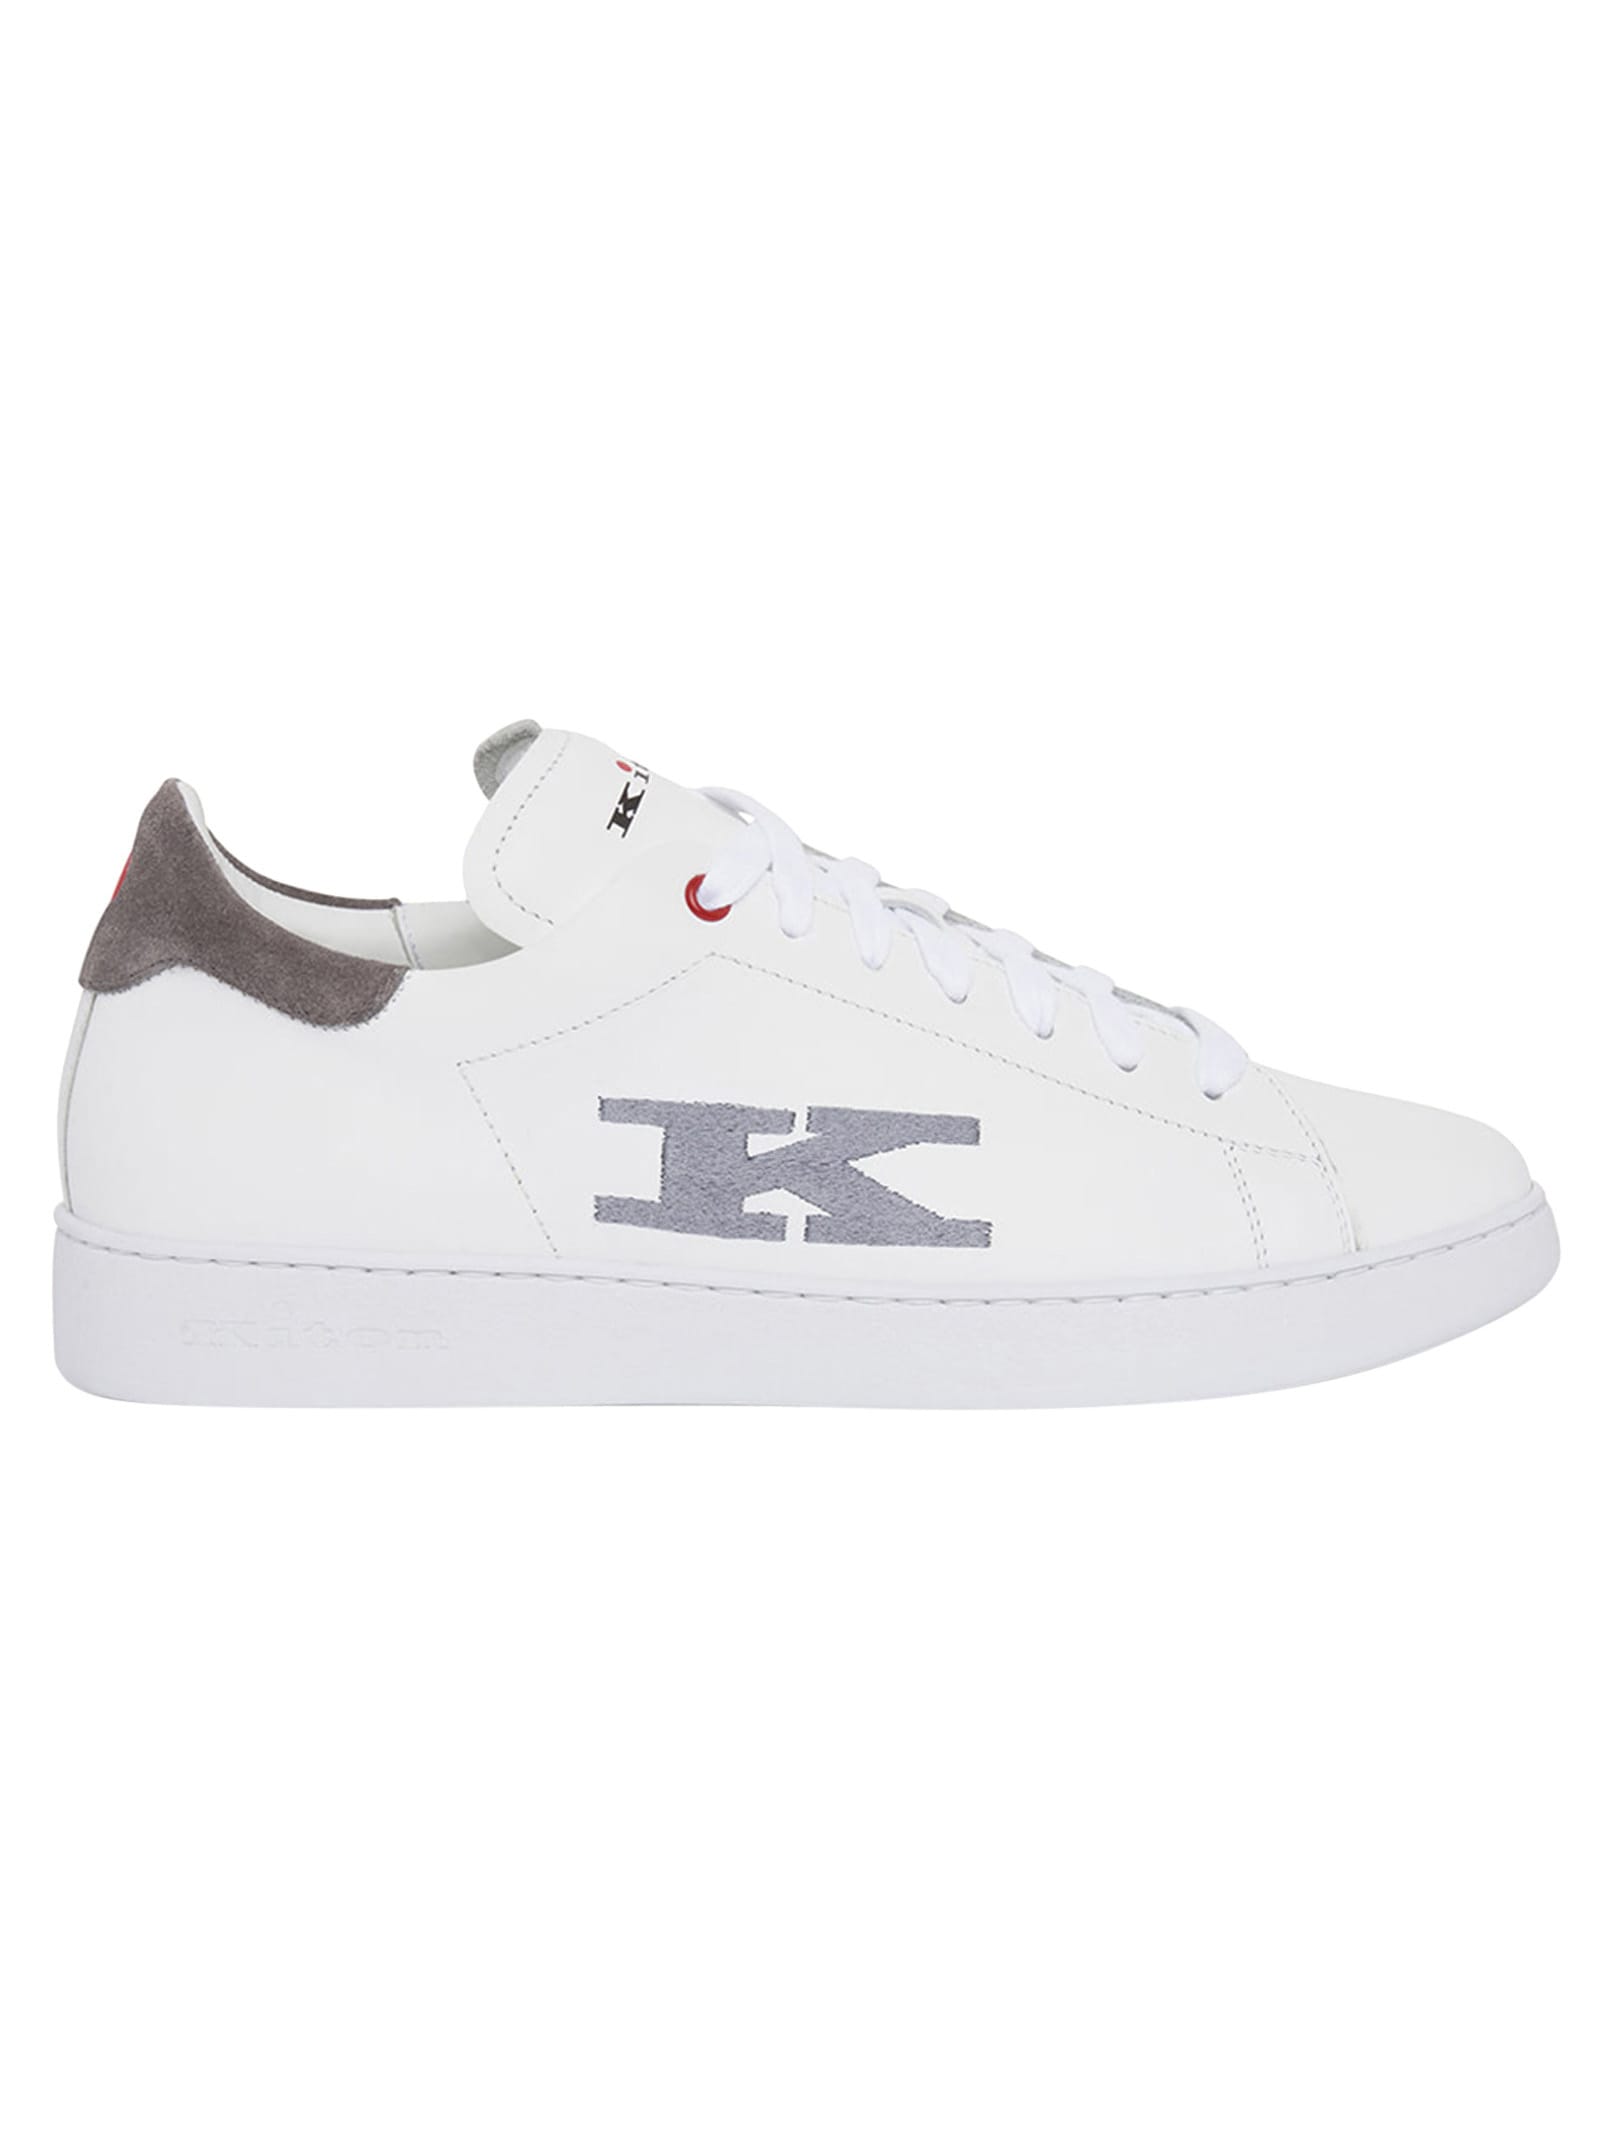 Kiton Sneakers Shoes Calfskin In White/lead